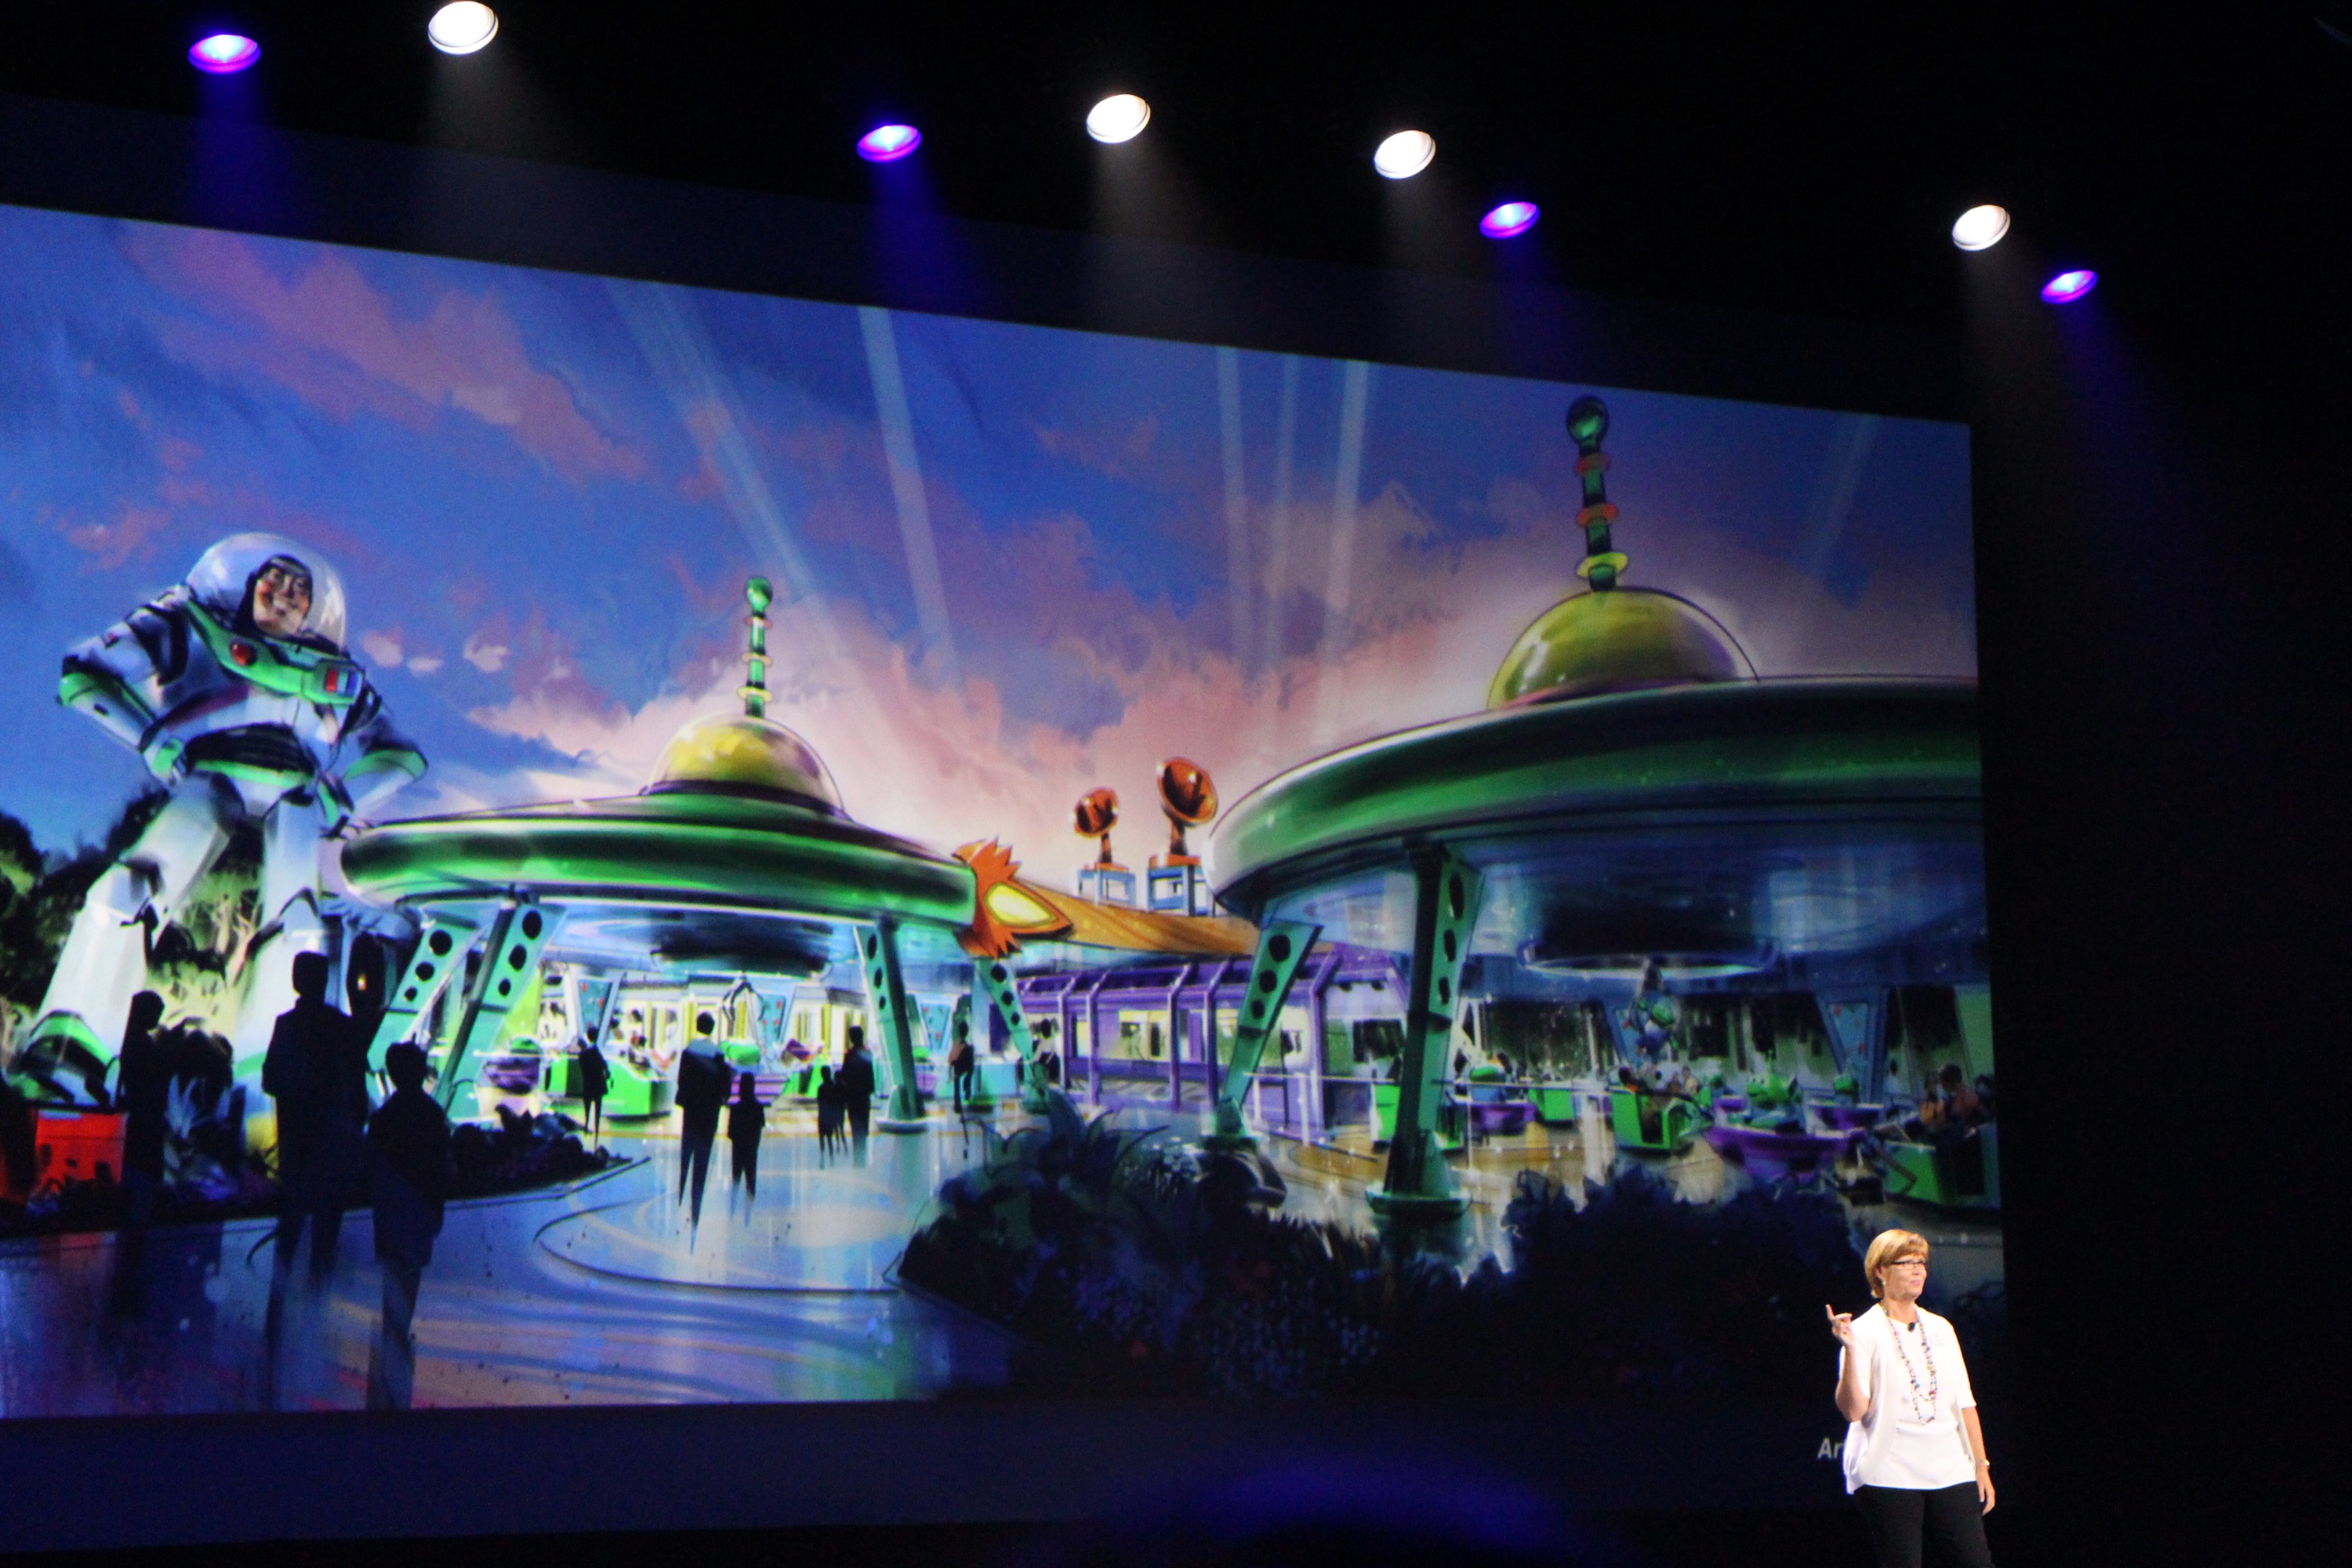 D23 Expo 2015 Live Updates - Sparkly Ever After